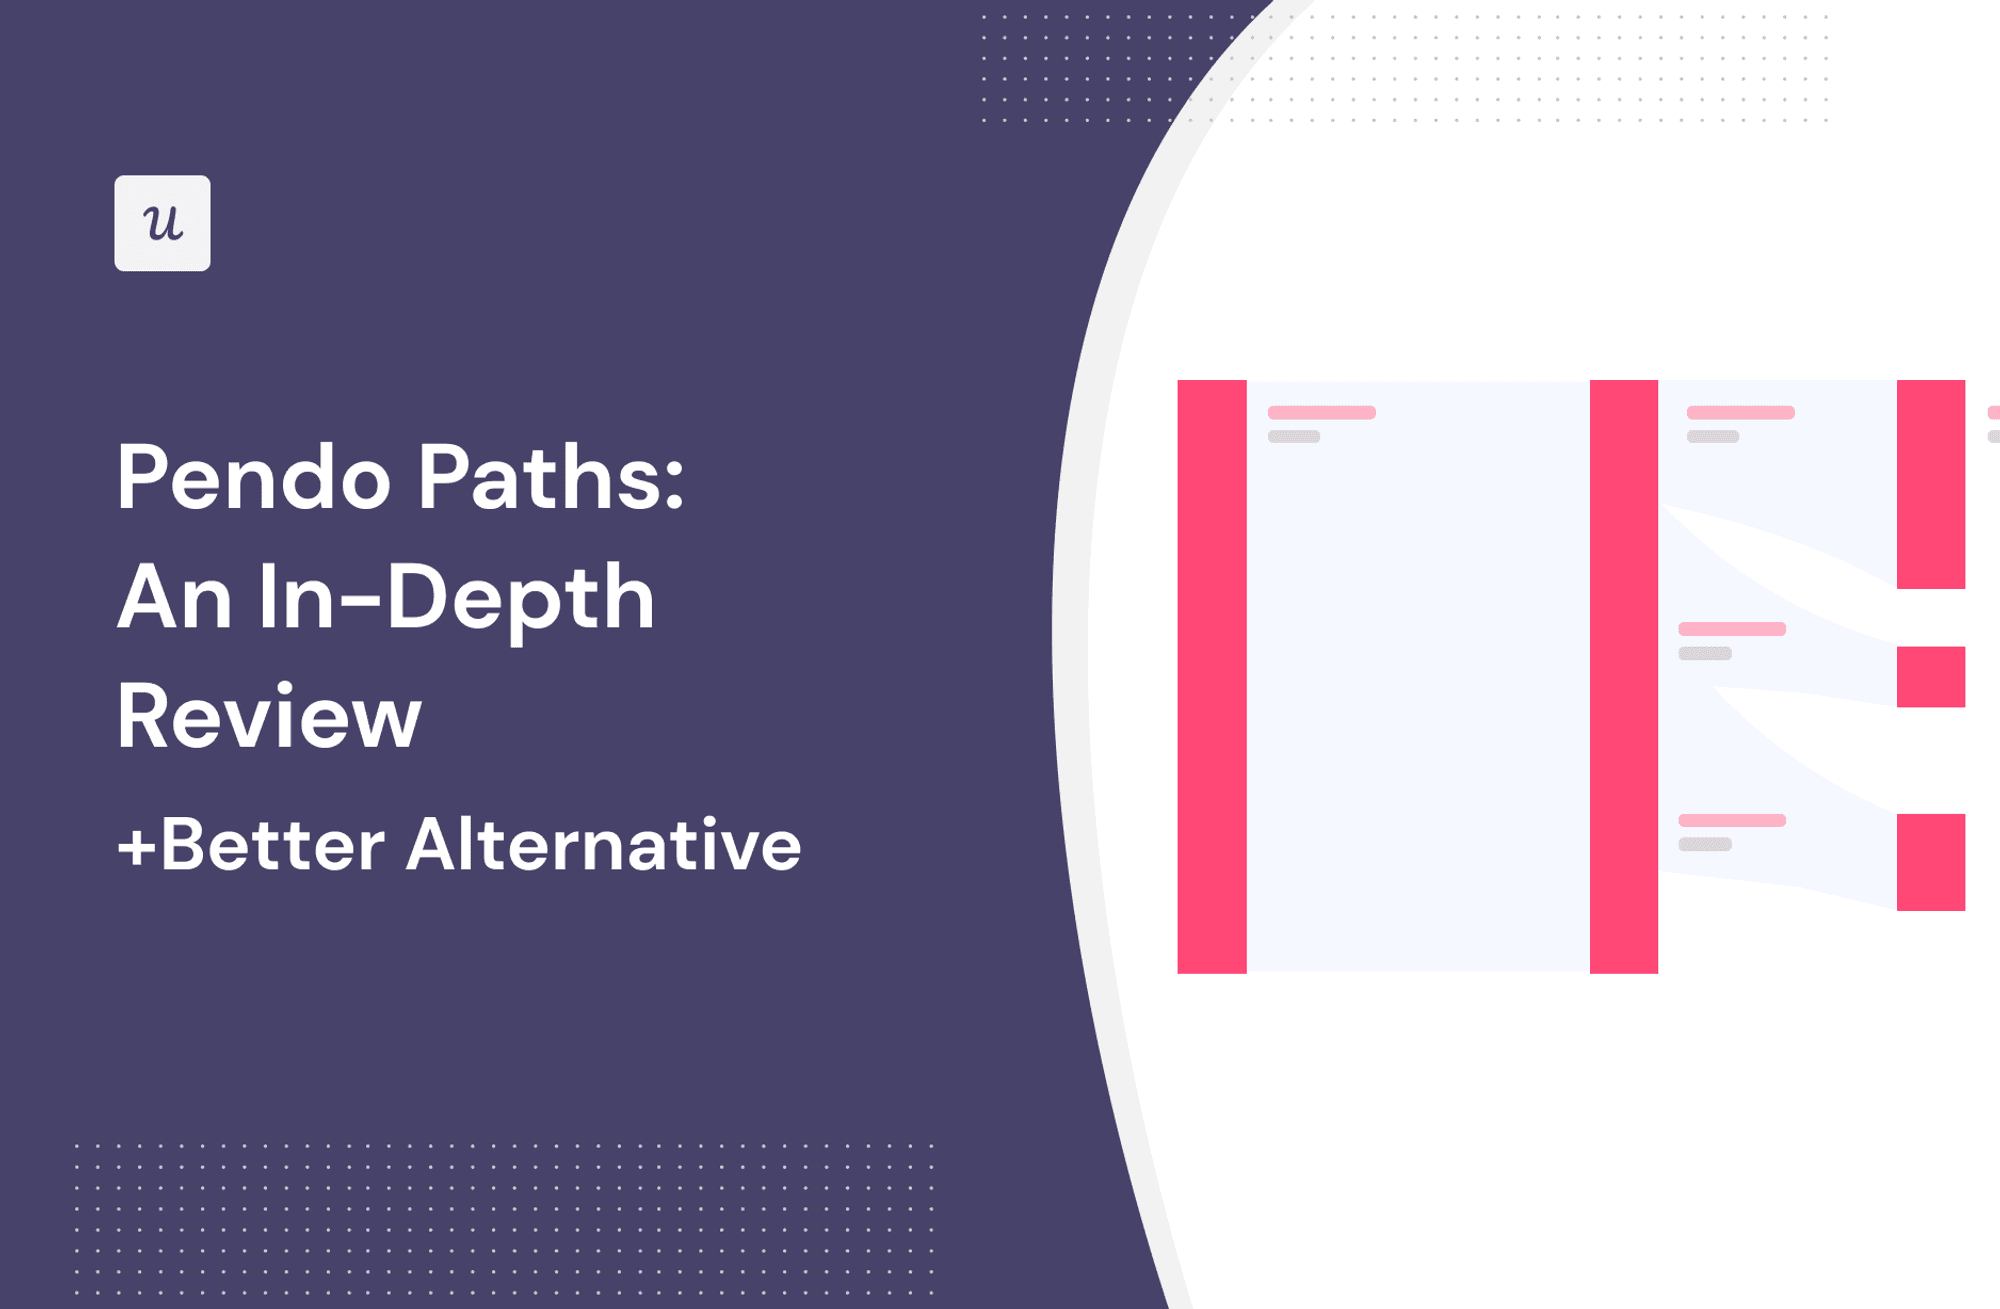 Pendo Paths: An In-Depth Review [+A Better Alternative] cover